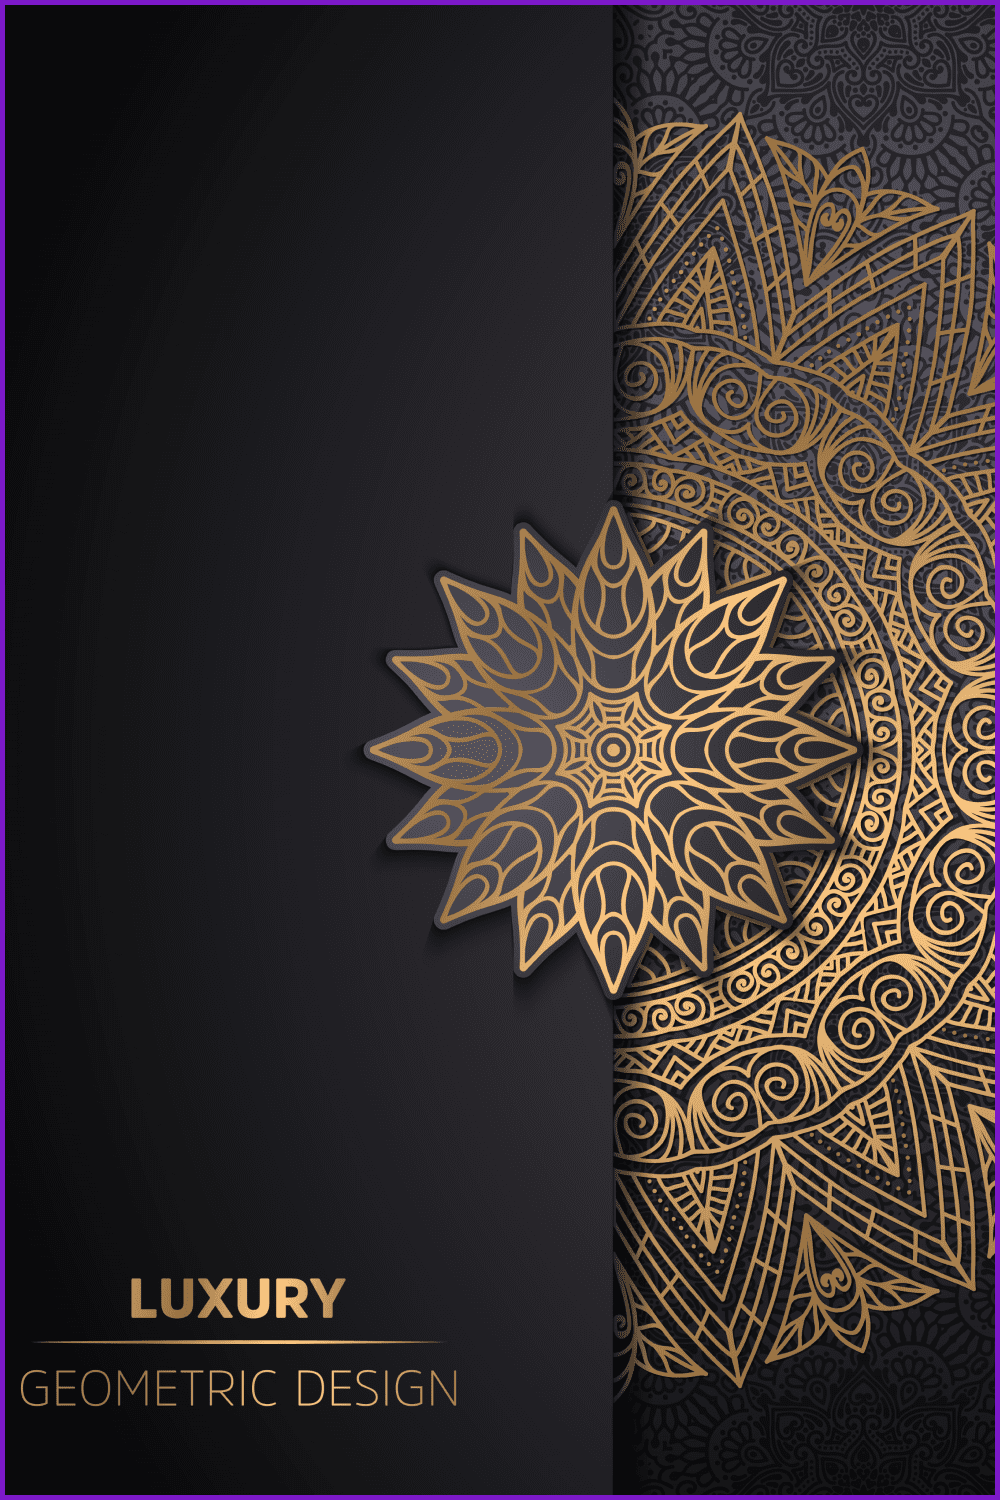 Gold rich looking mandala on black ackground.